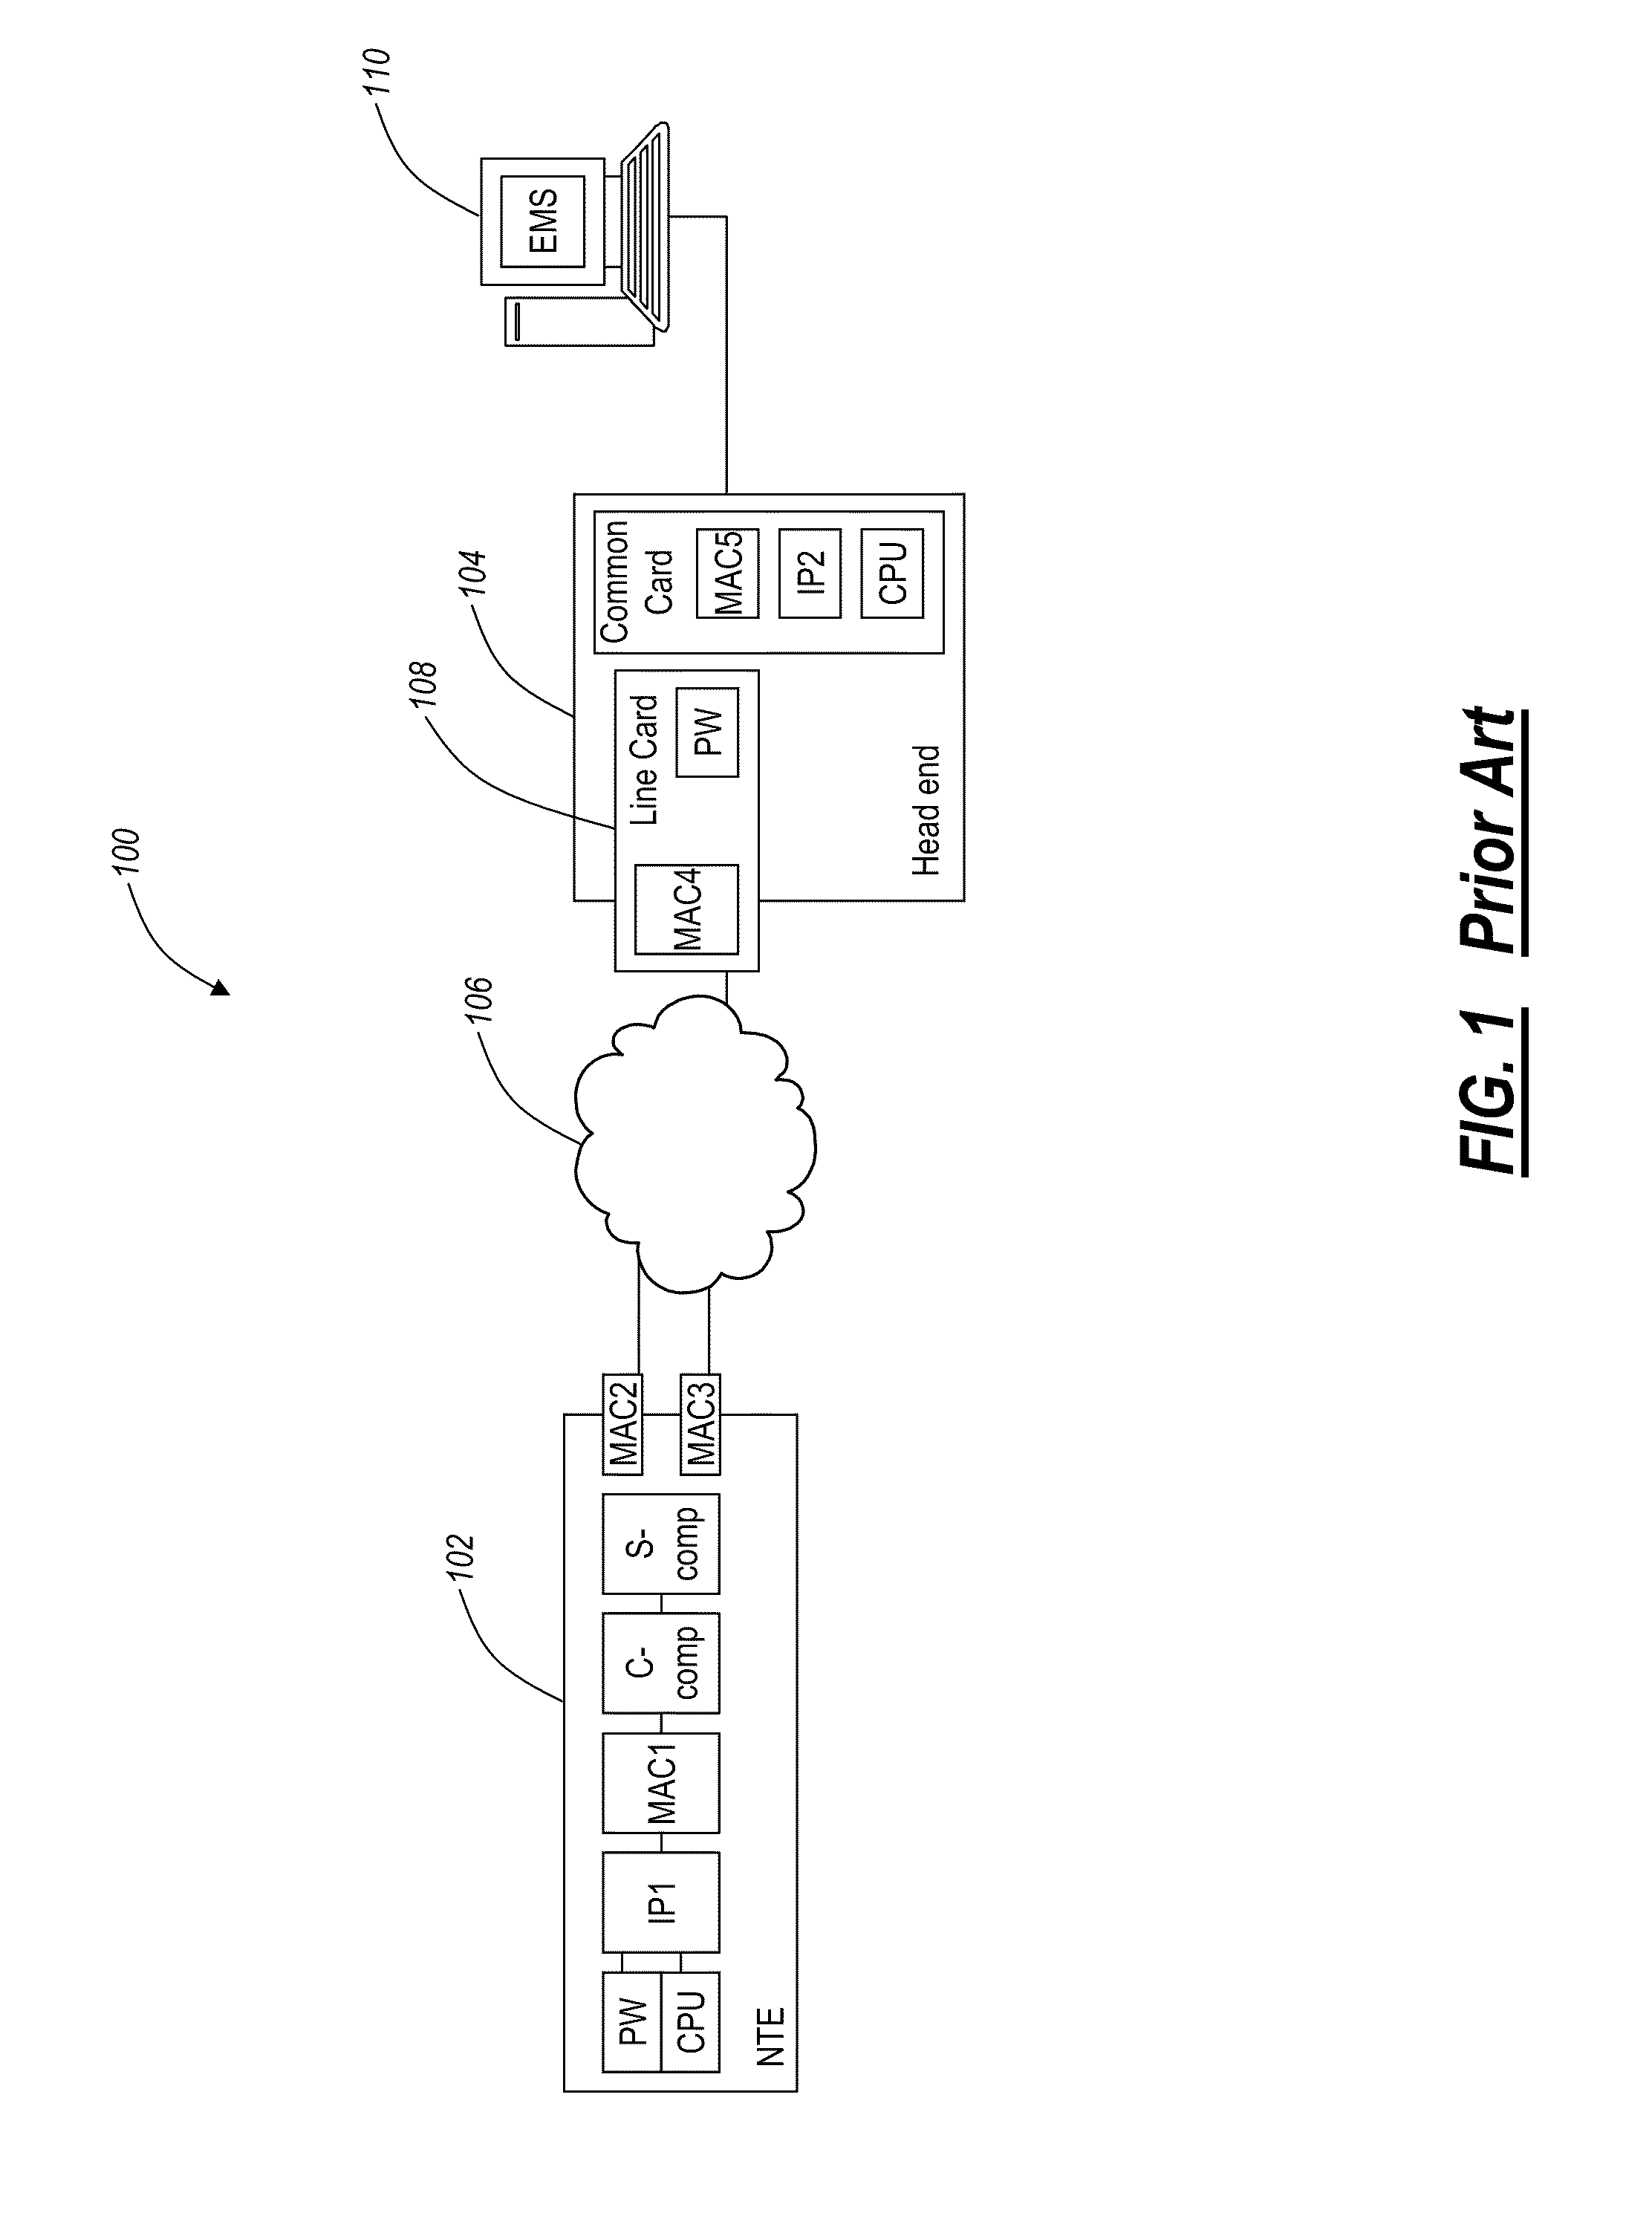 Systems and methods for connectivity fault management extensions for automated activation of services through association of service related attributes